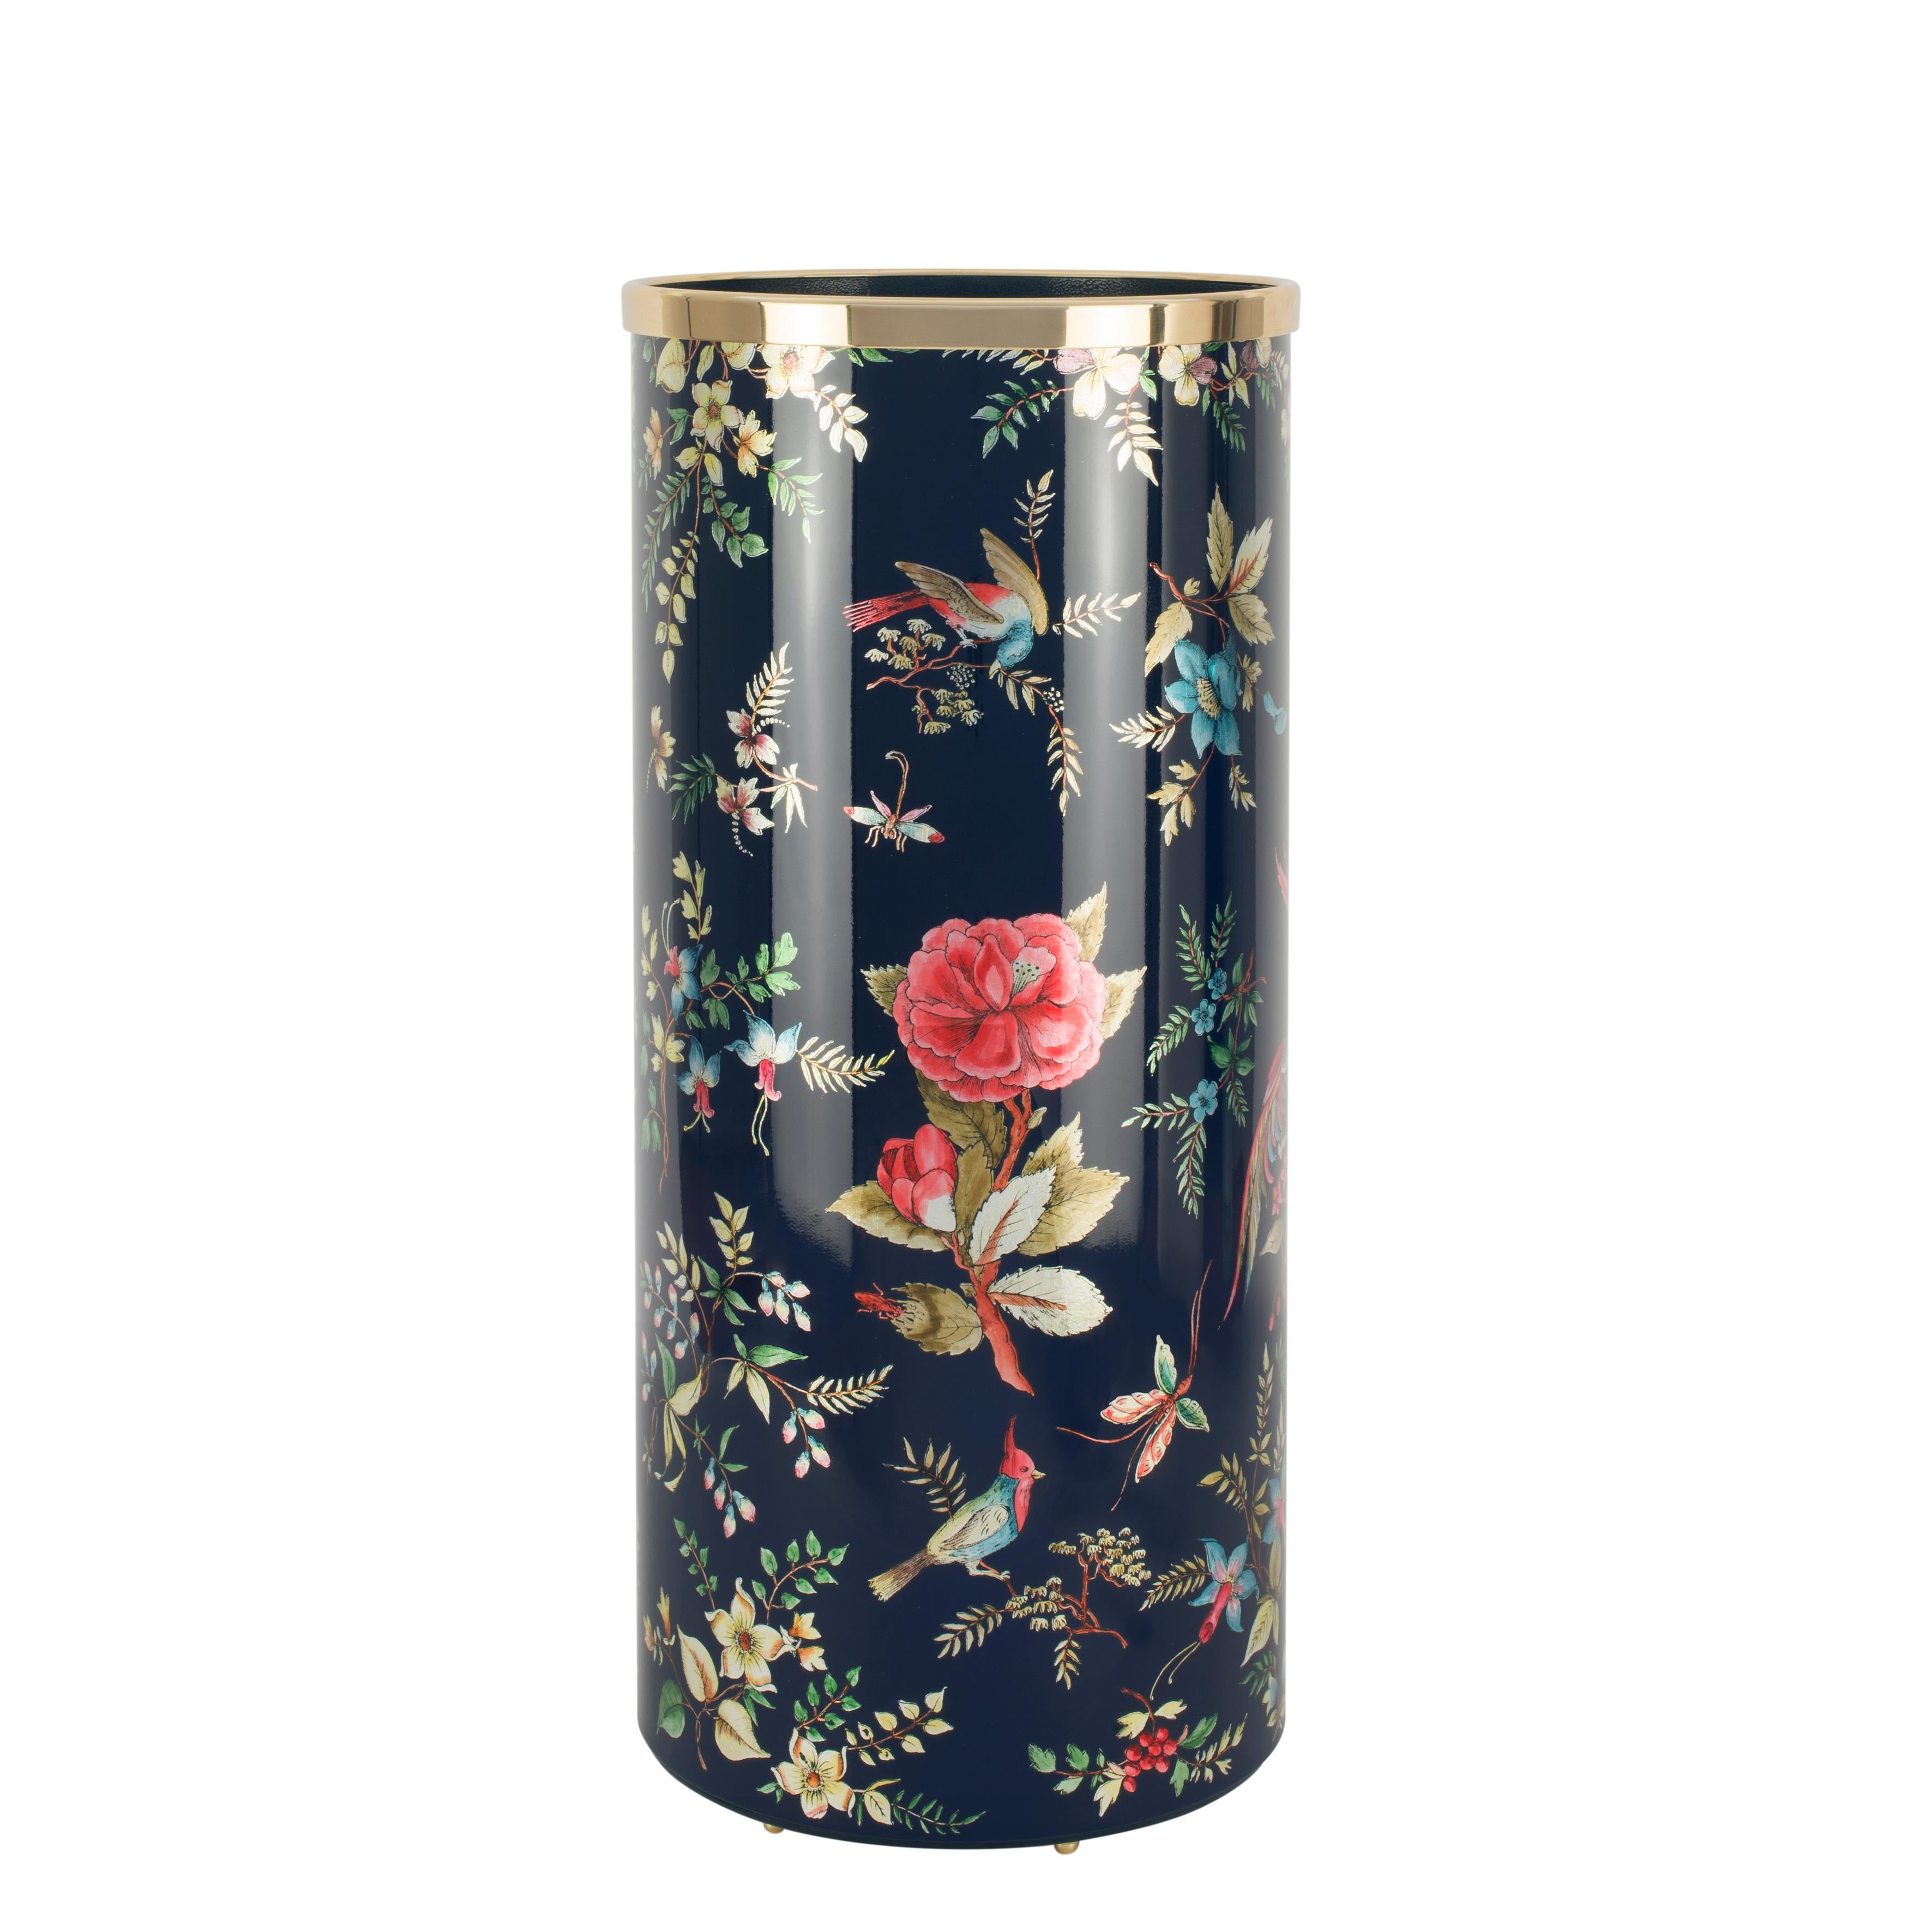 Like all Fornasetti accessories, the umbrella stand is handcrafted using original artisan techniques. This piece is silk-screened by hand, painted by hand and covered with a smooth lacquer.

The shape is still the same designed by Piero Fornasetti